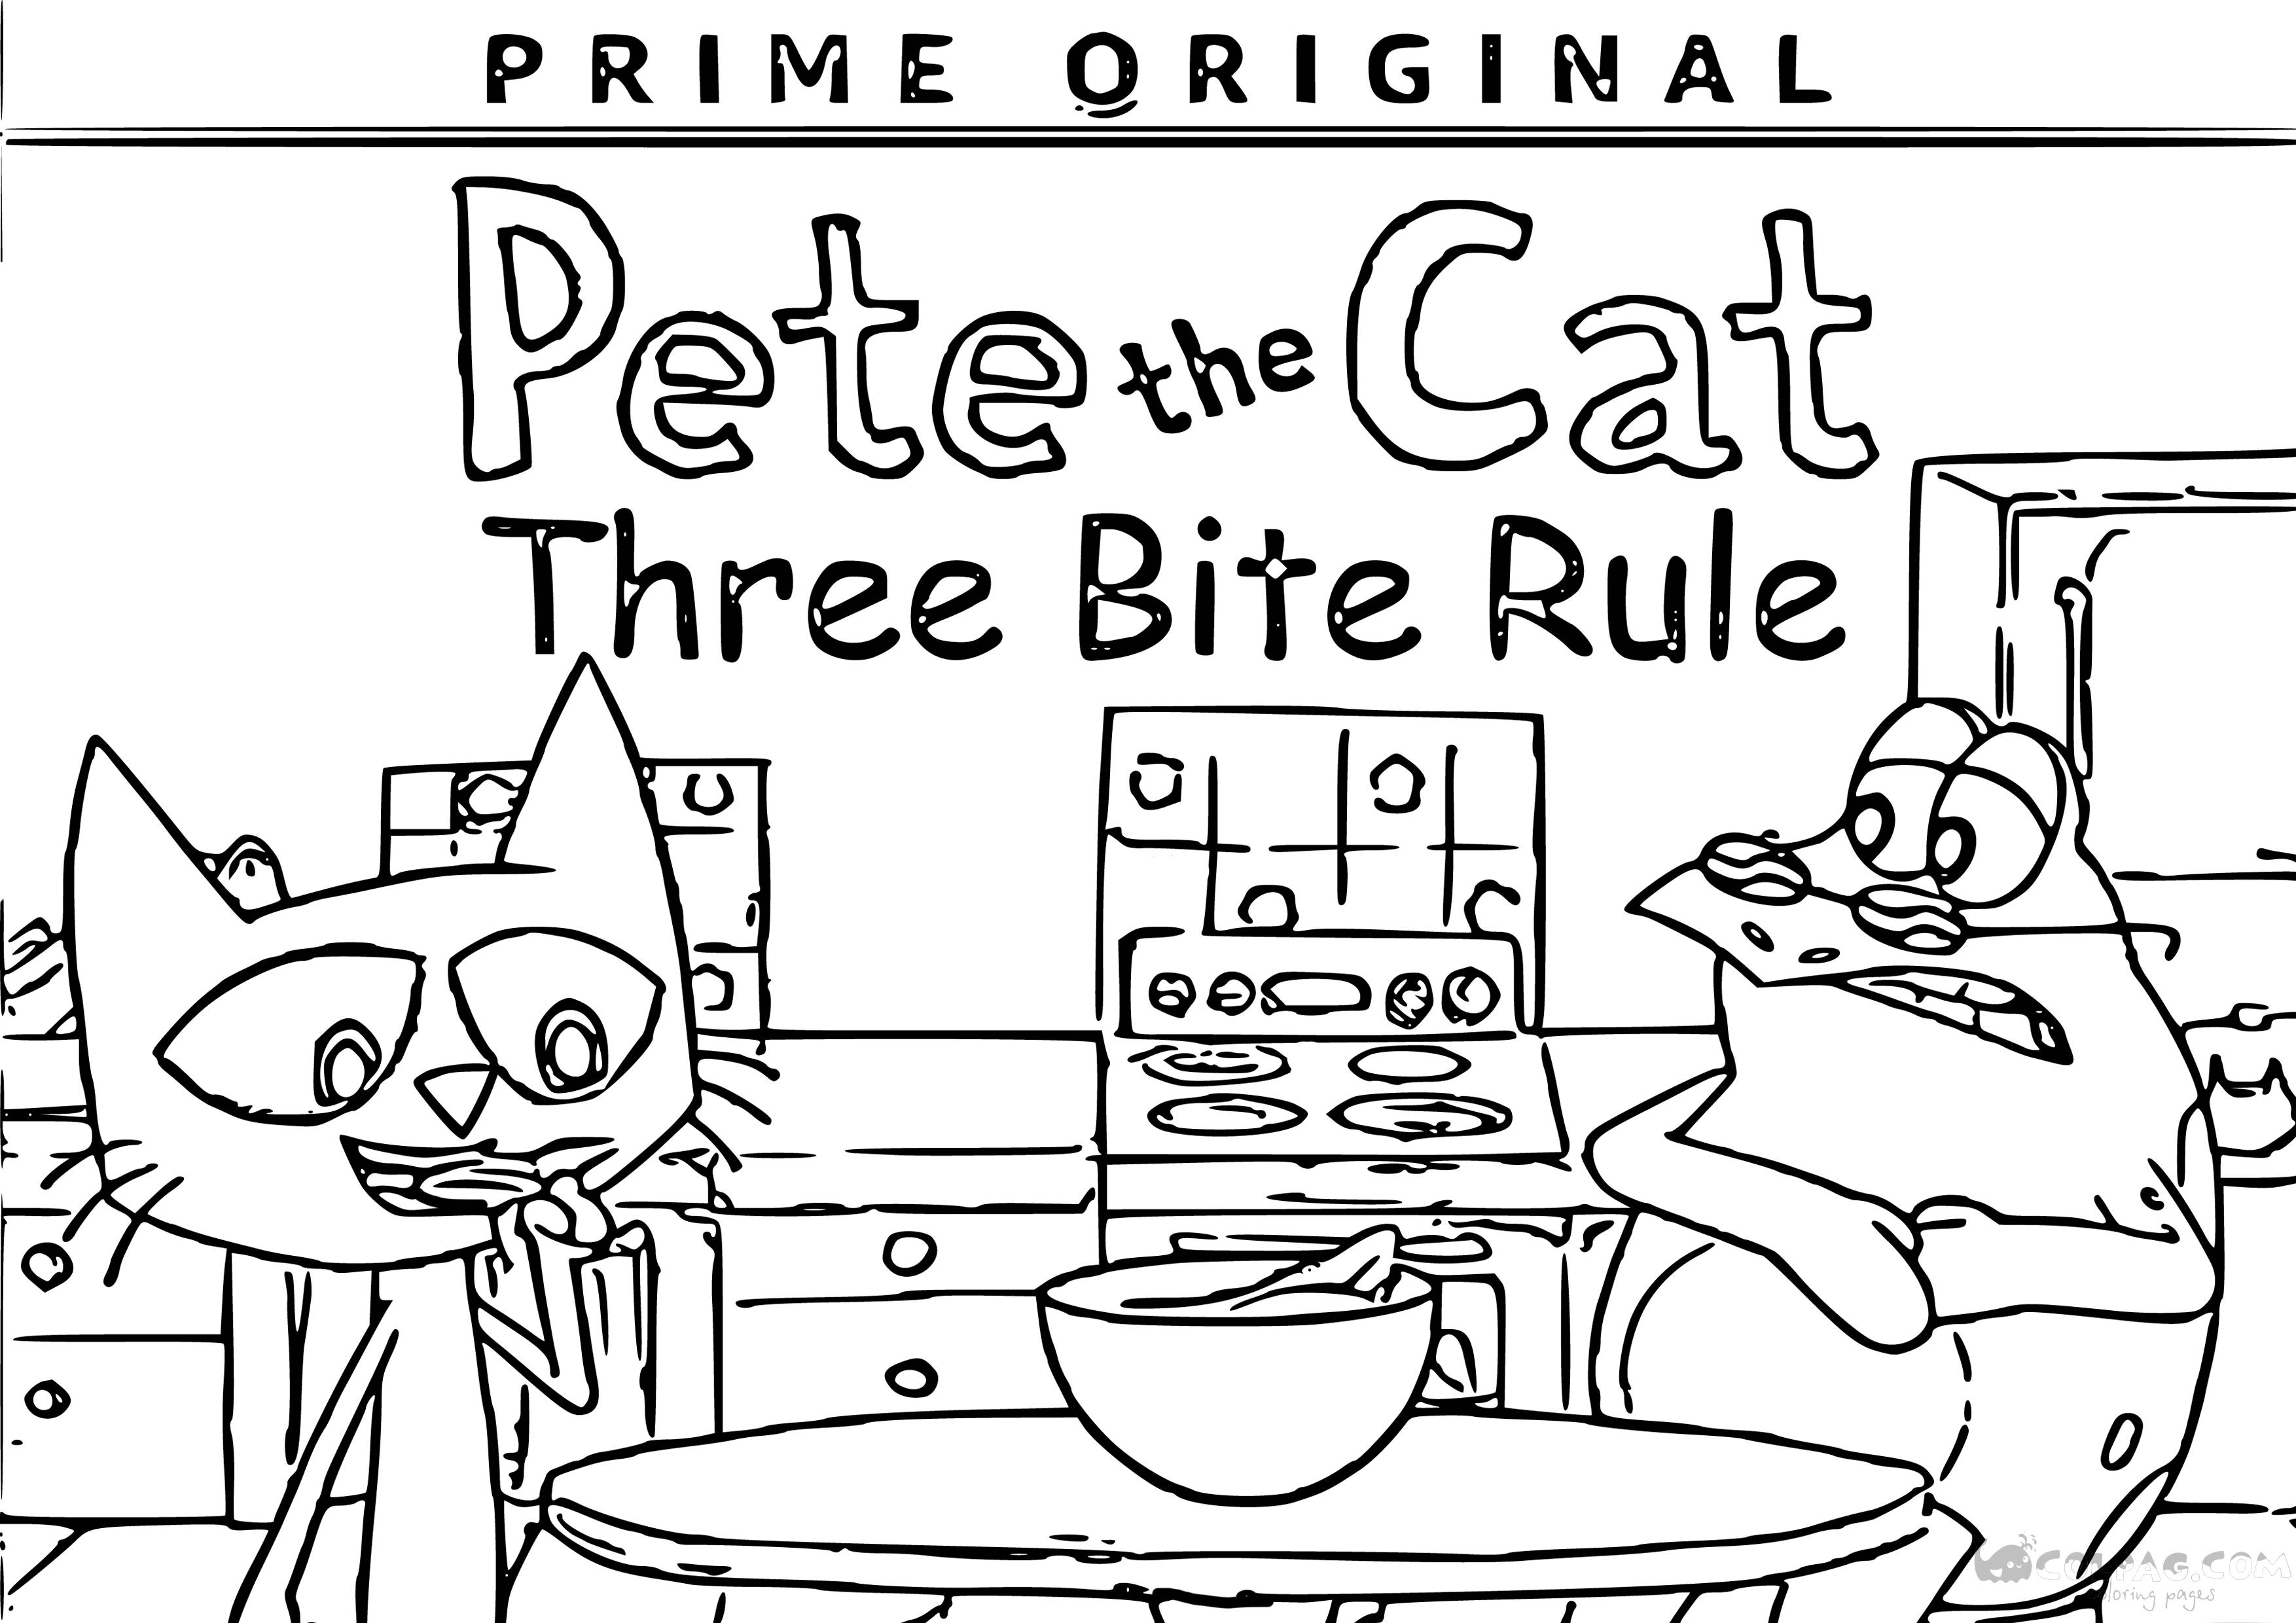 pete-the-cat-coloting-page-57-colpag